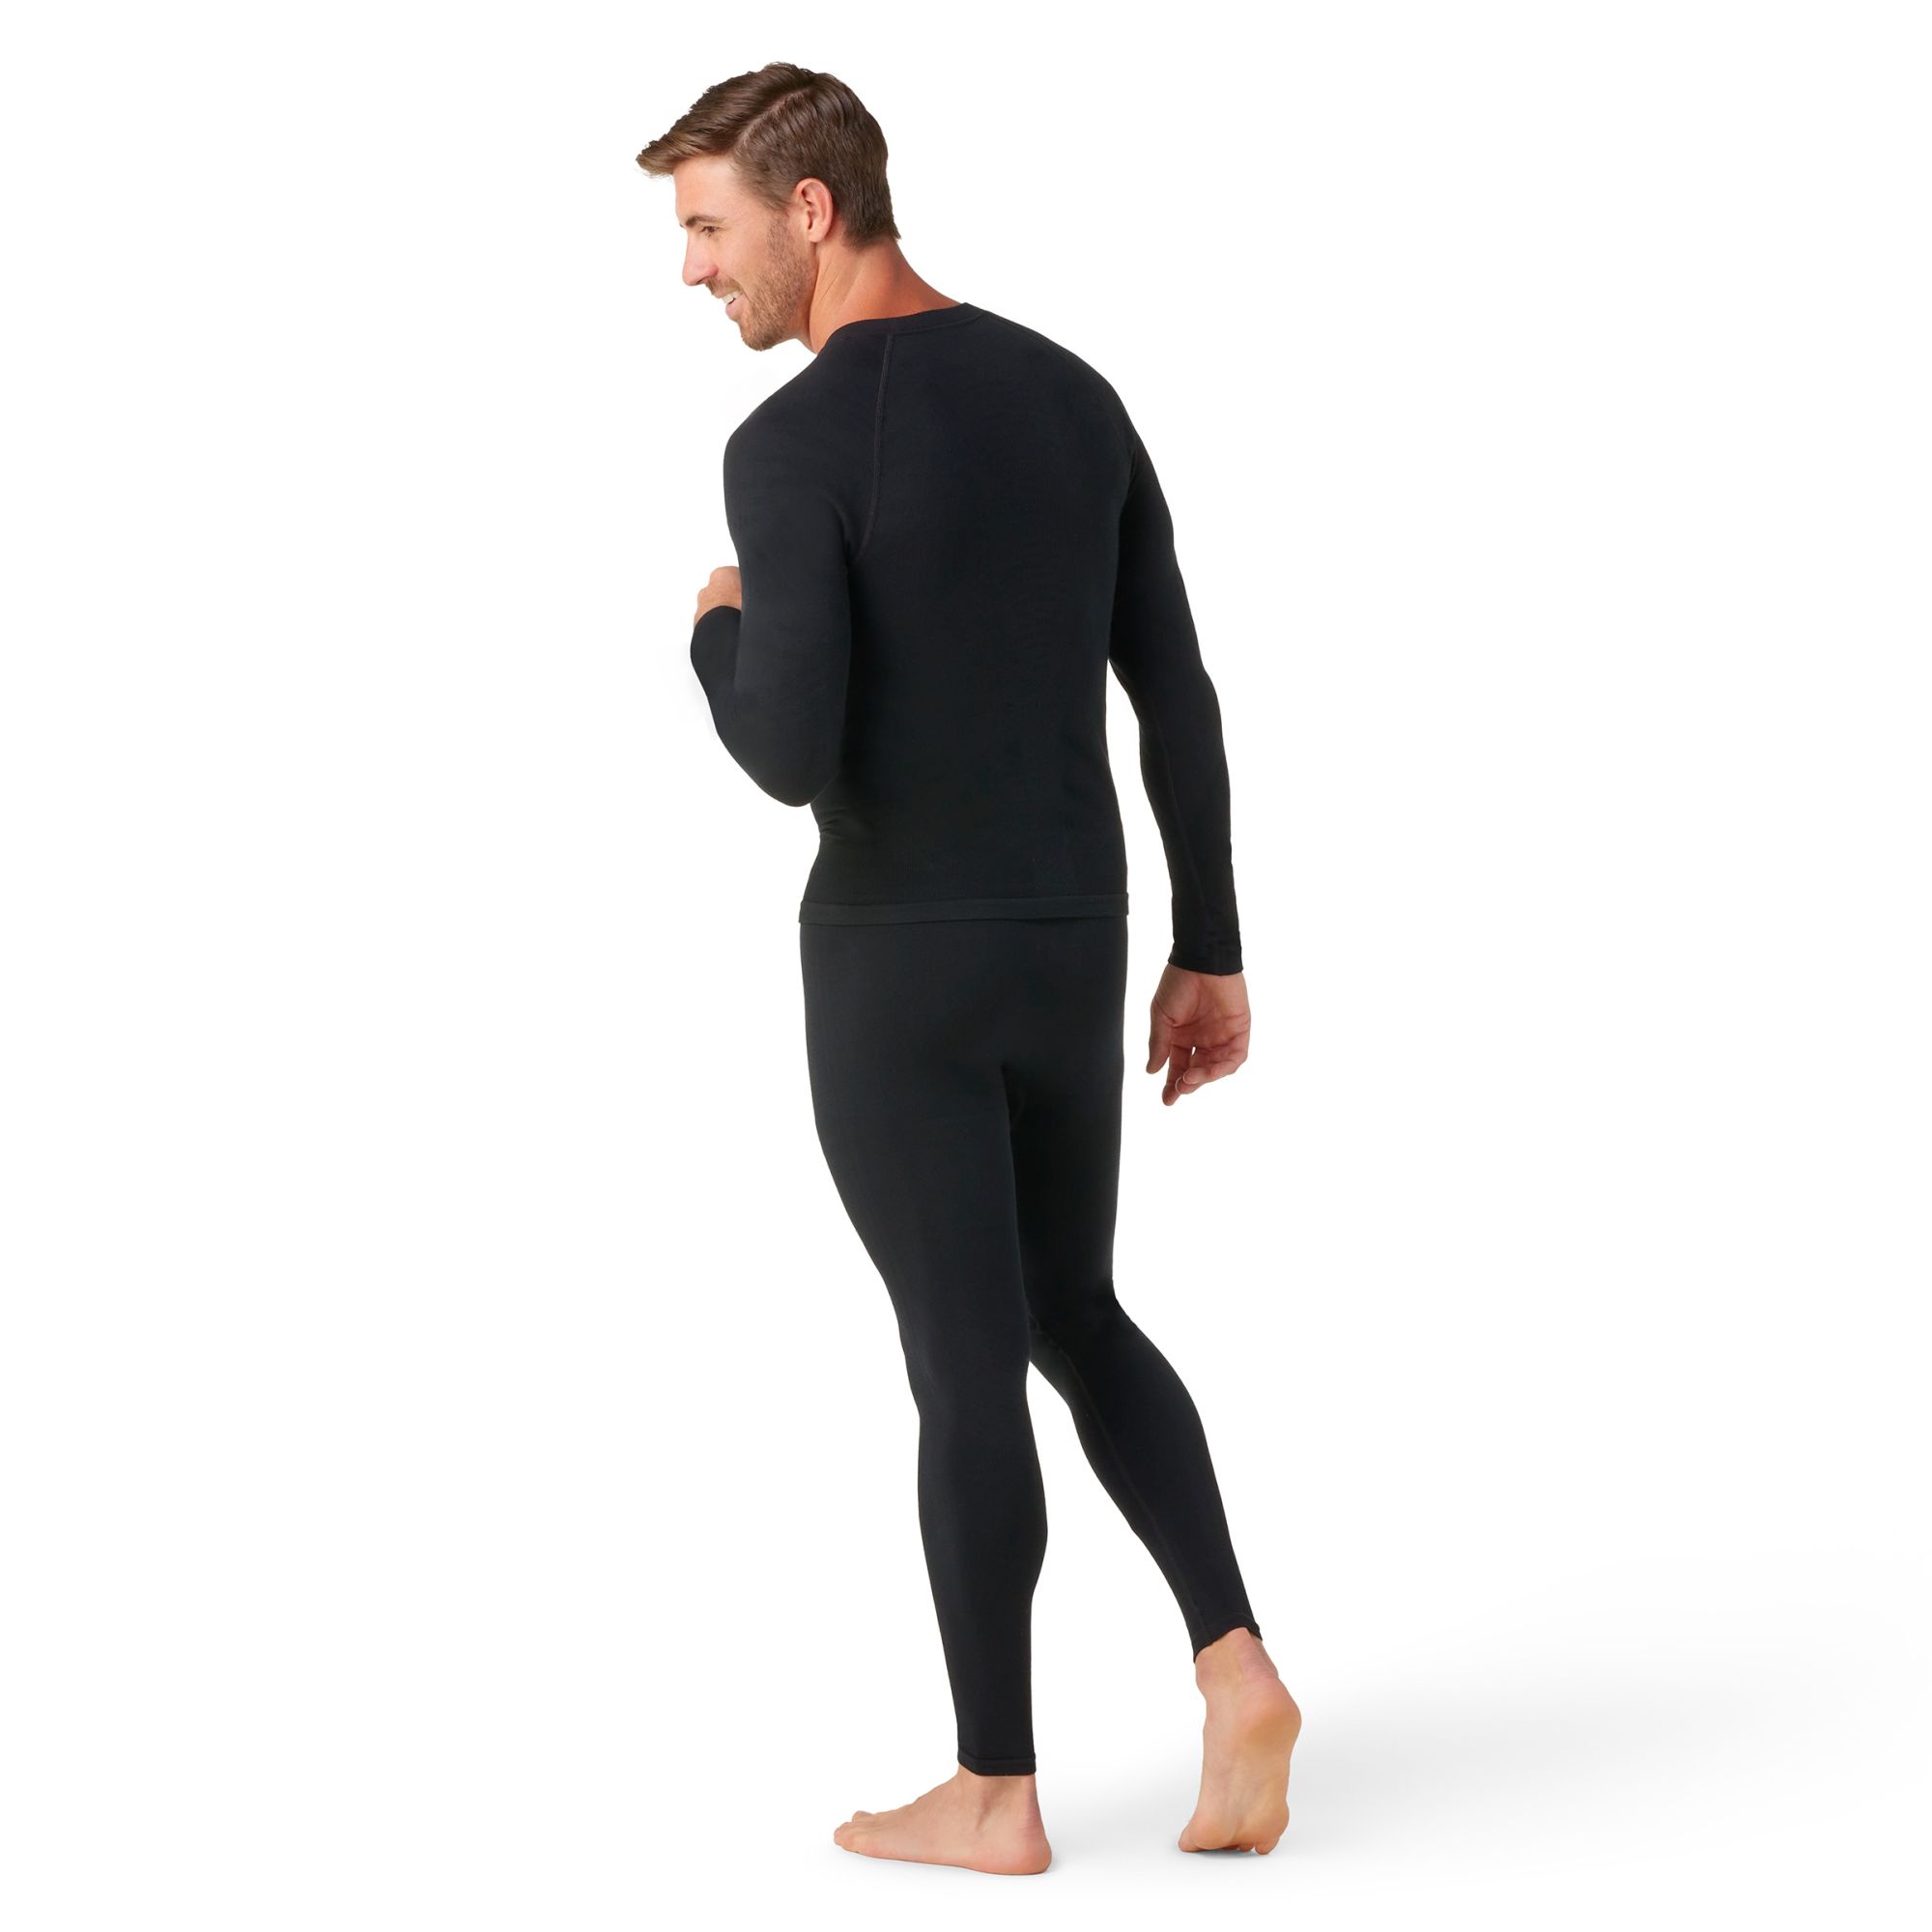 Men's Intraknit Active Base Layer Long Sleeve | Smartwool Canada